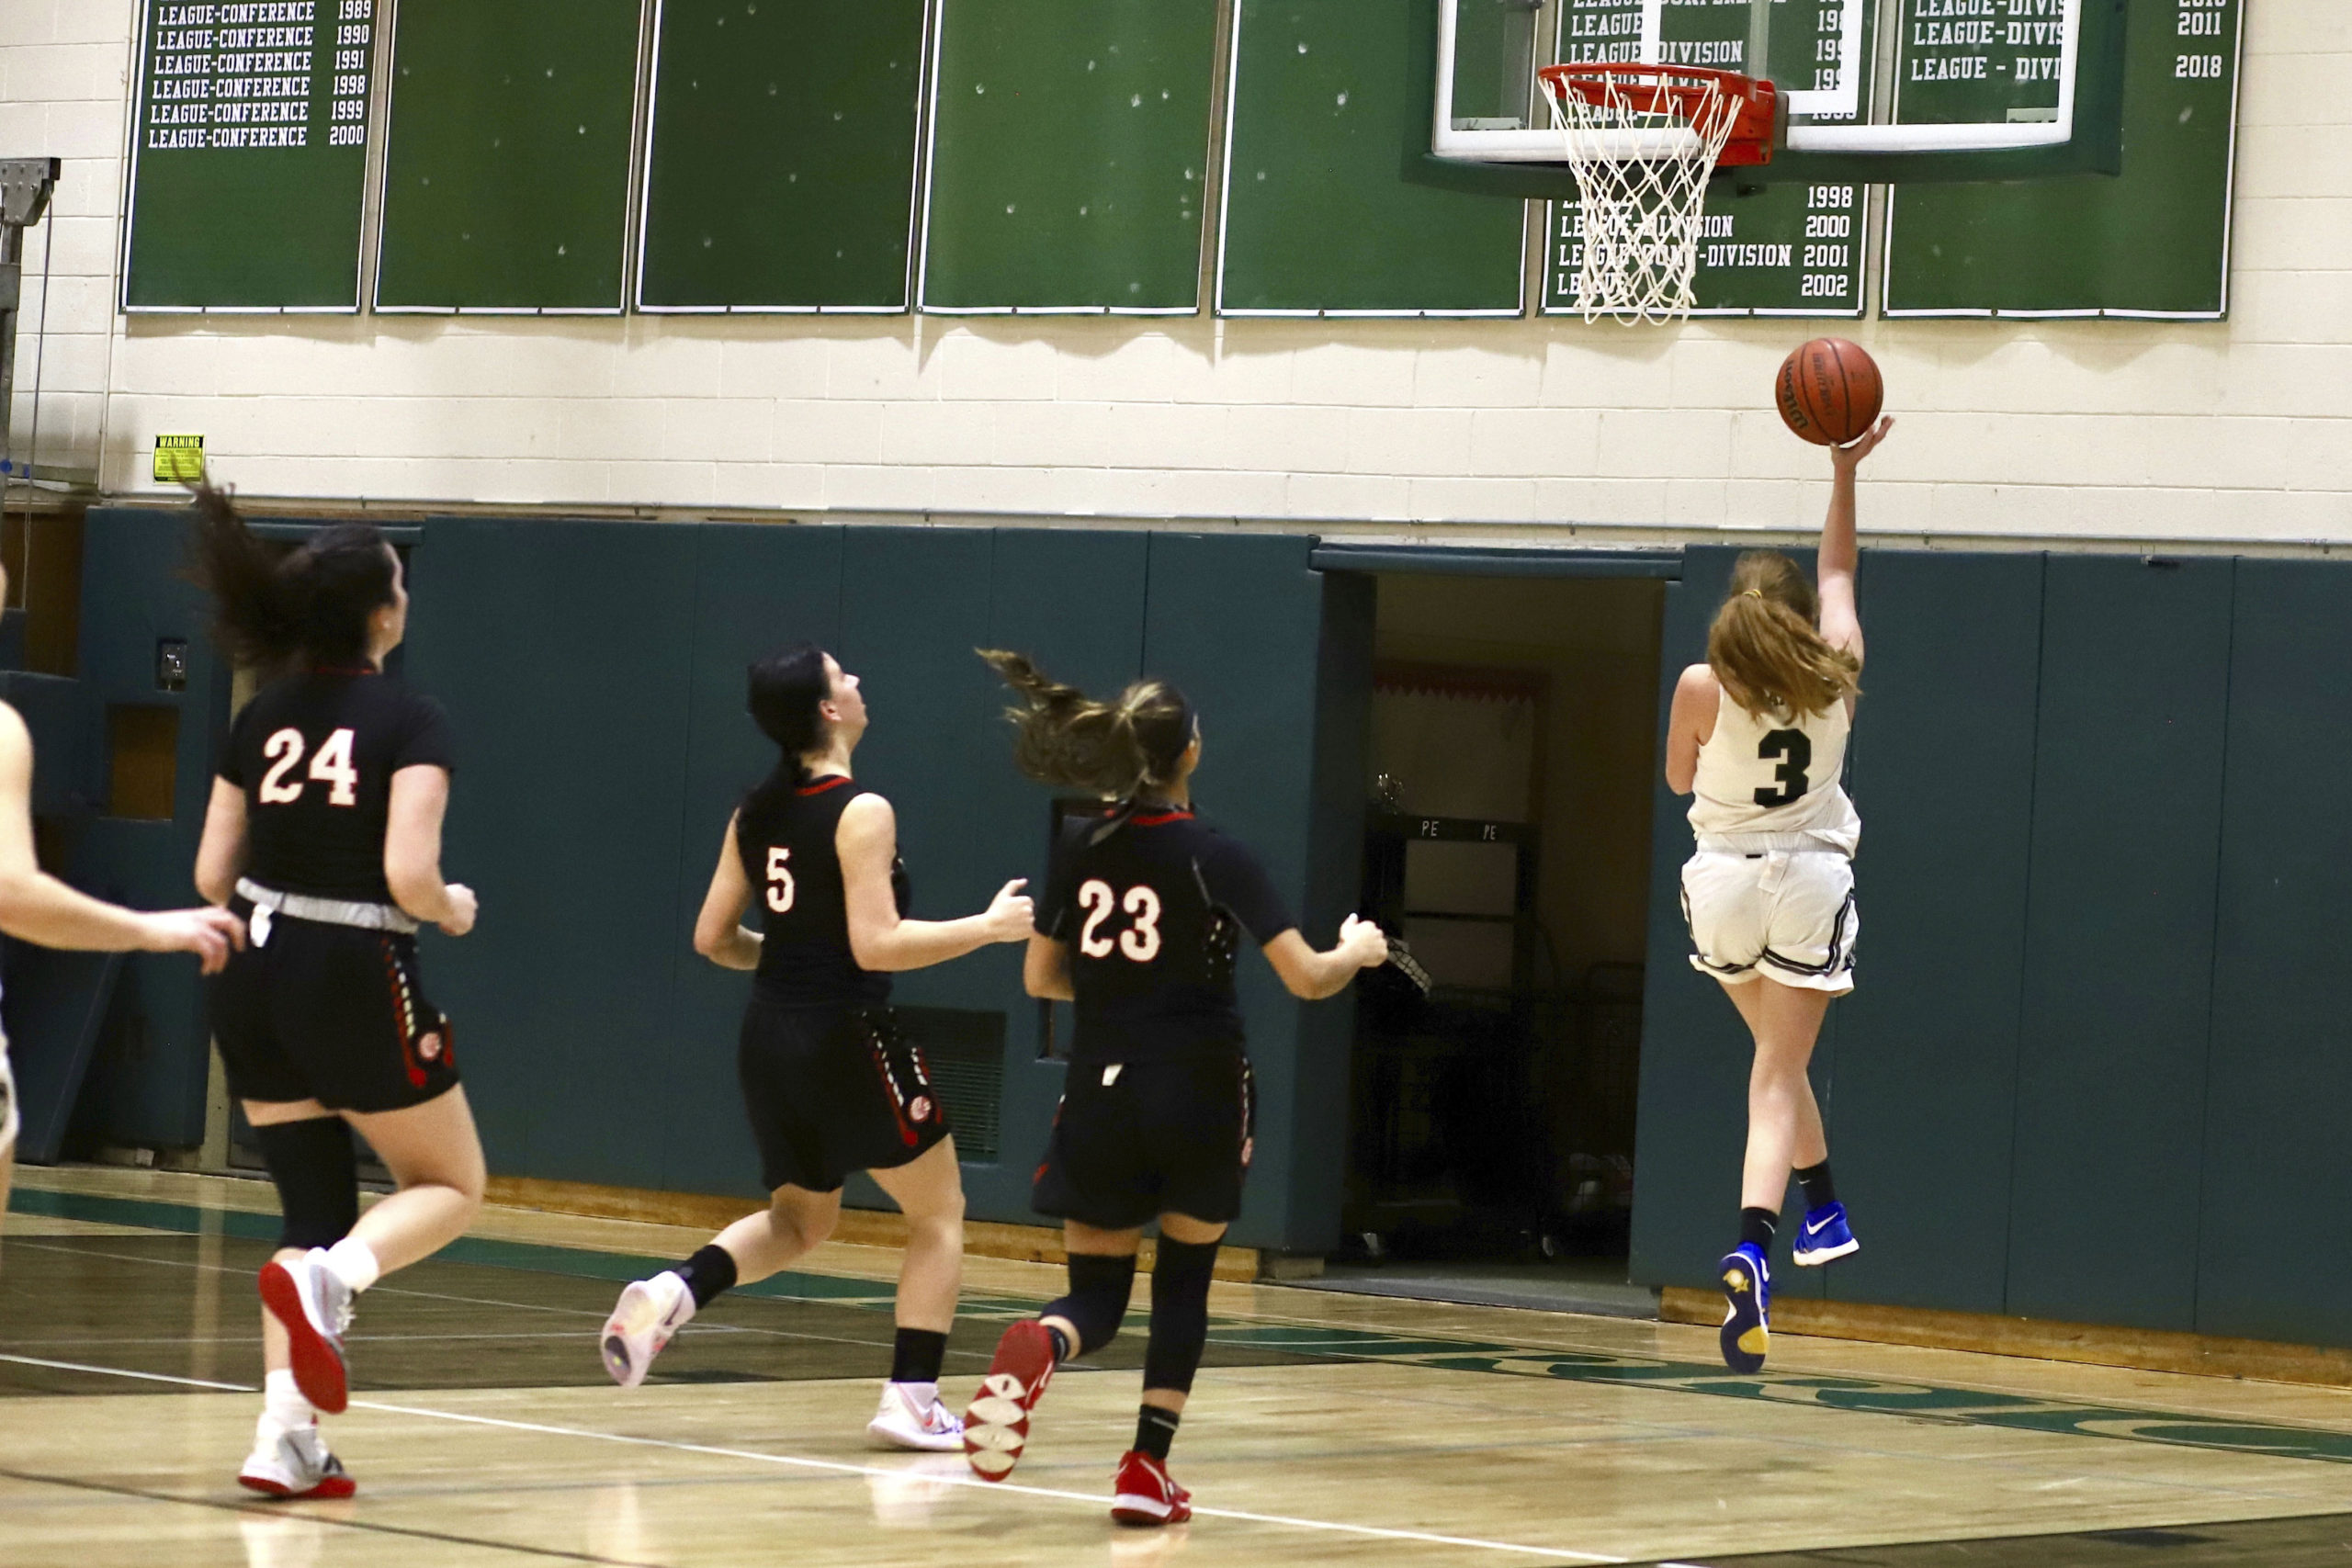 Westhampton Beach junior guard Molly McCarthy breaks away with the ball and scores on a layup. CHRISTINE HEEREN